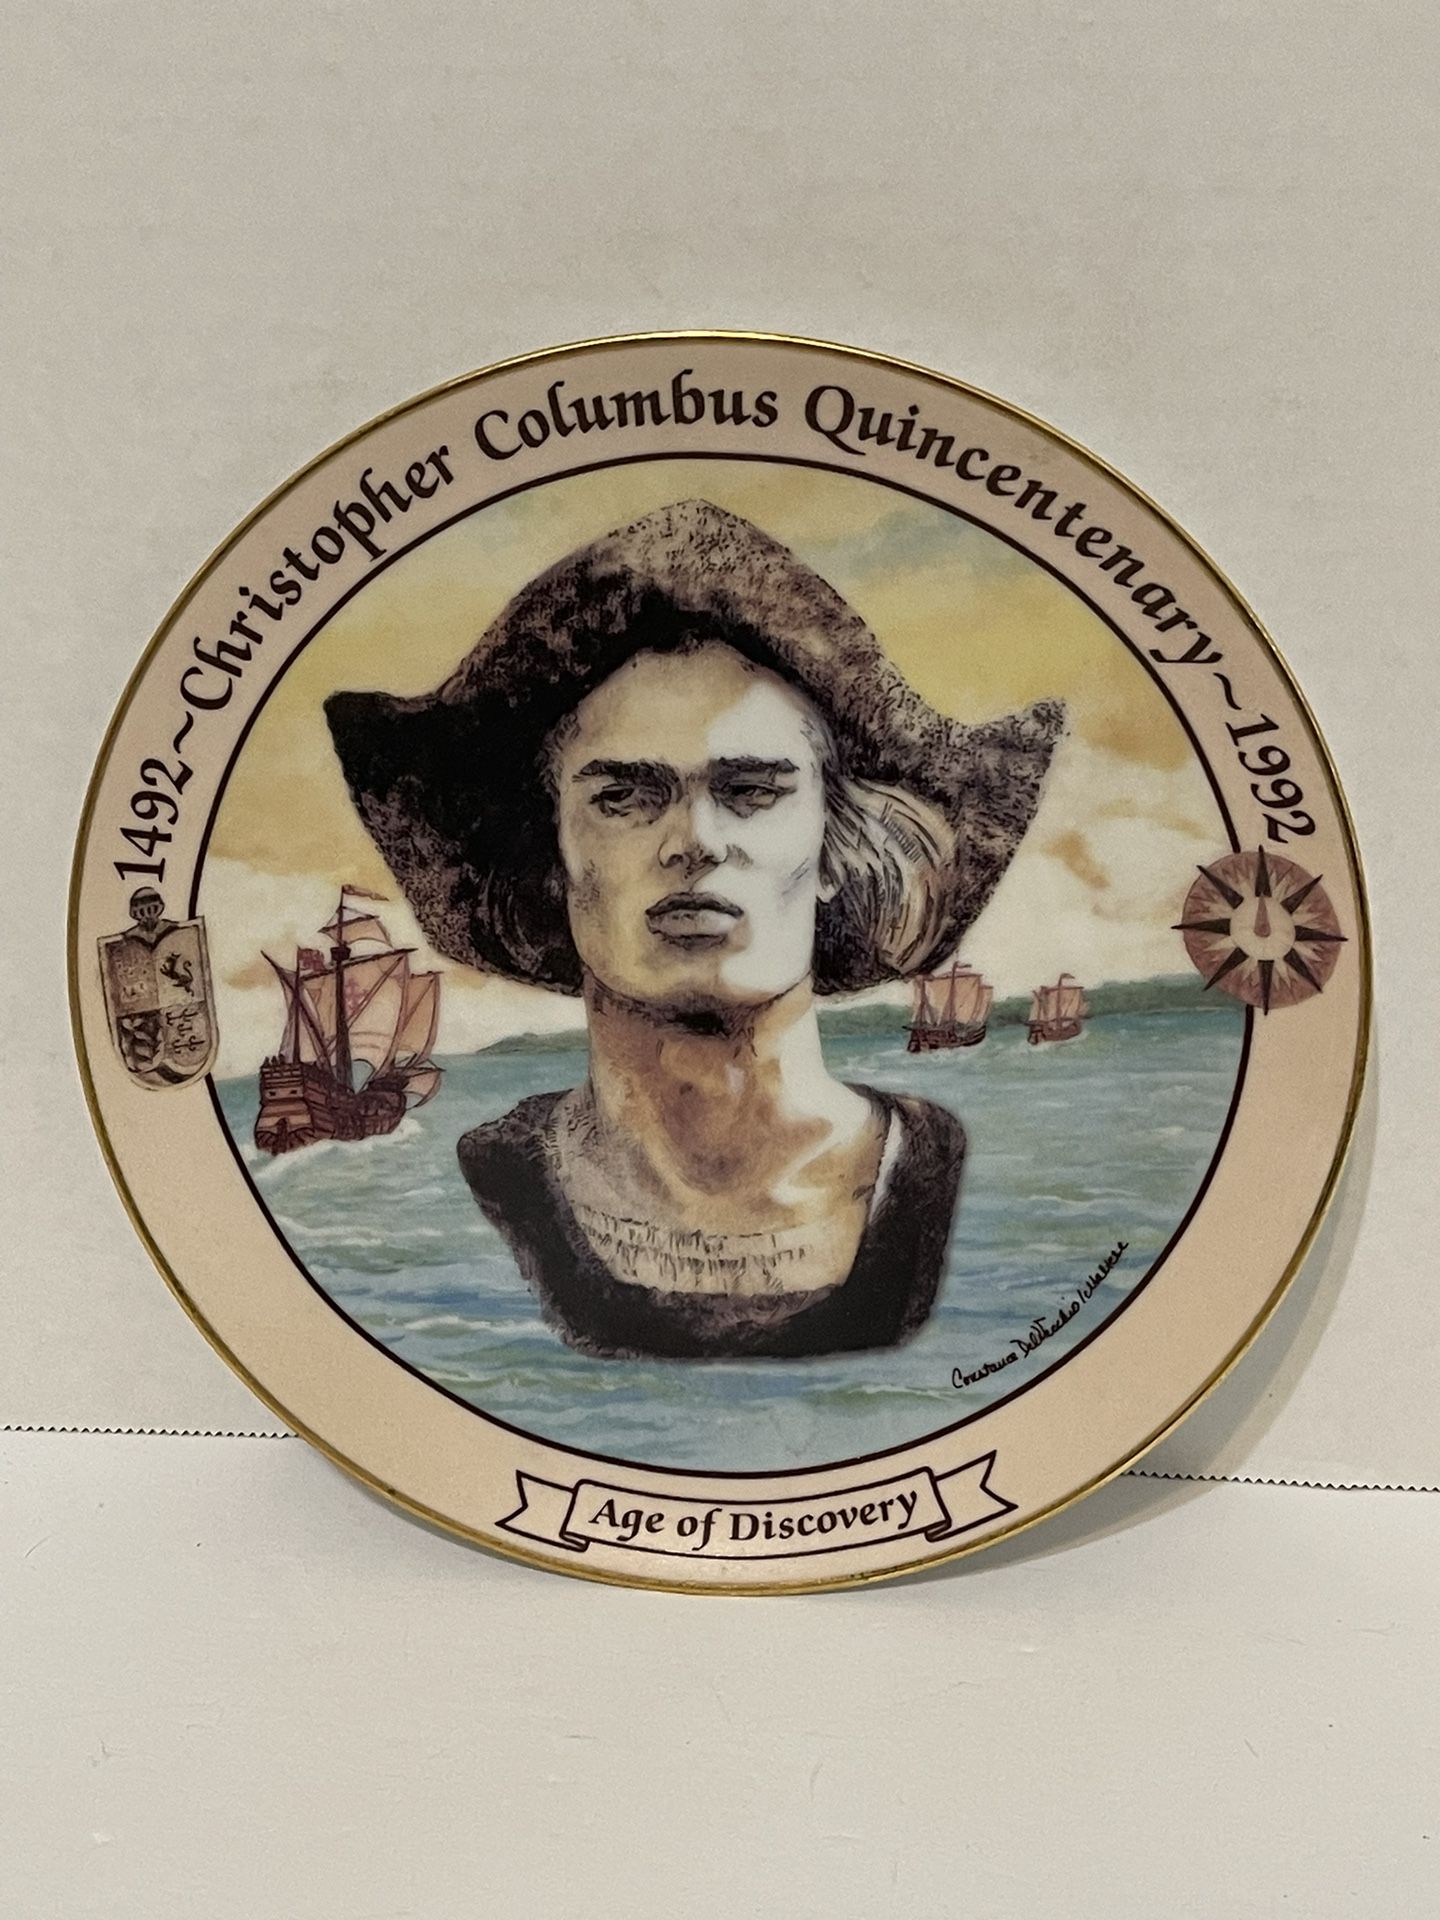  Vintage 1991 Christopher Columbus Plate. Age of Discovery Portrait Collectible.